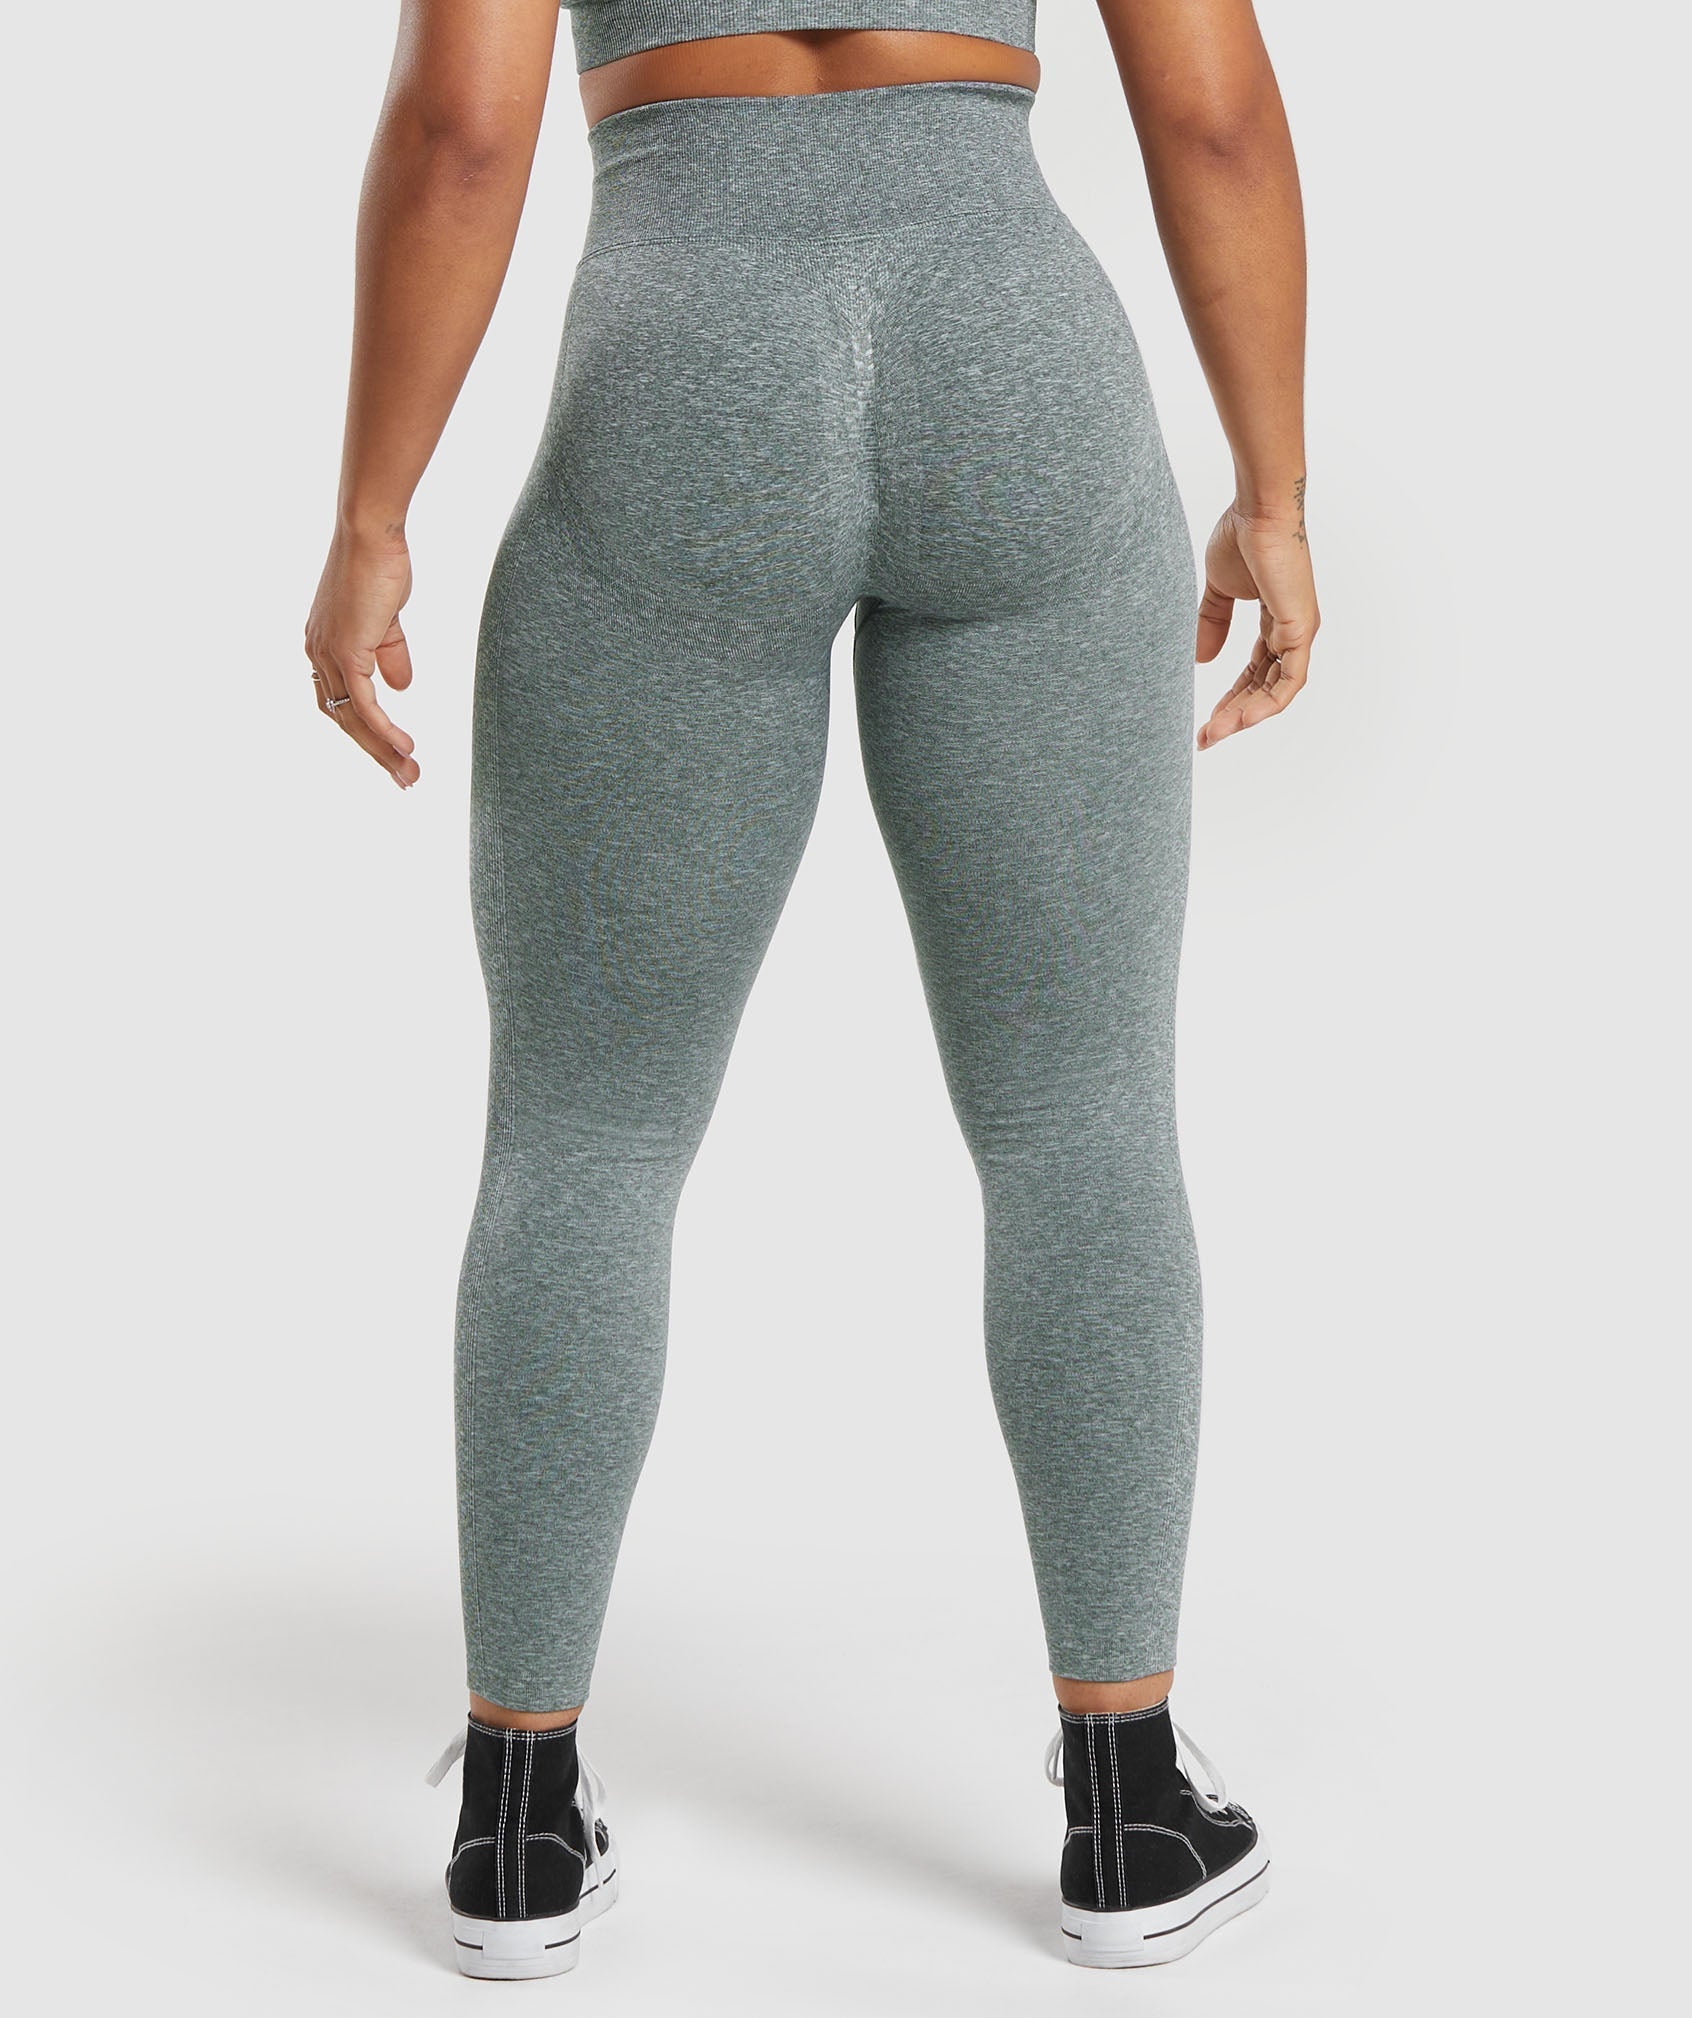 Lift Contour Seamless Leggings in Slate Teal/White Marl - view 3